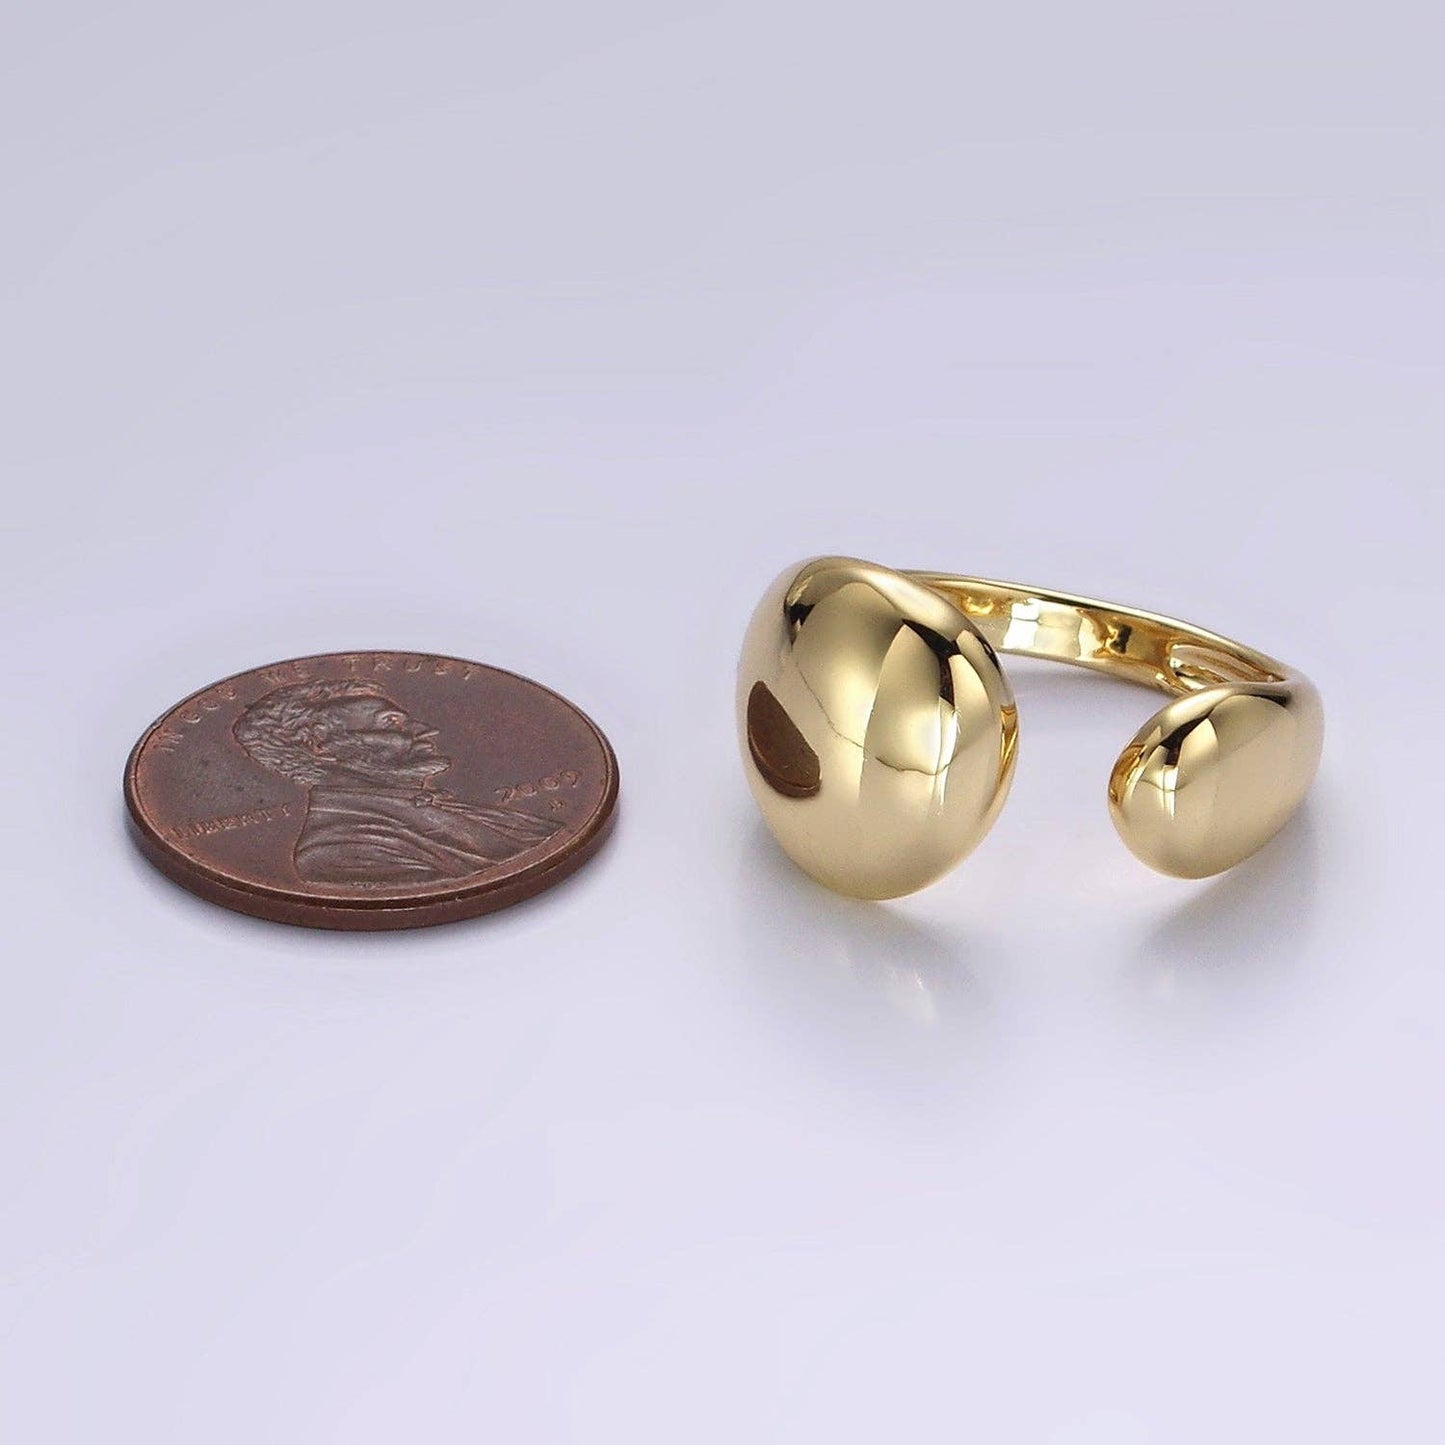 Rounded Hug wrap ring